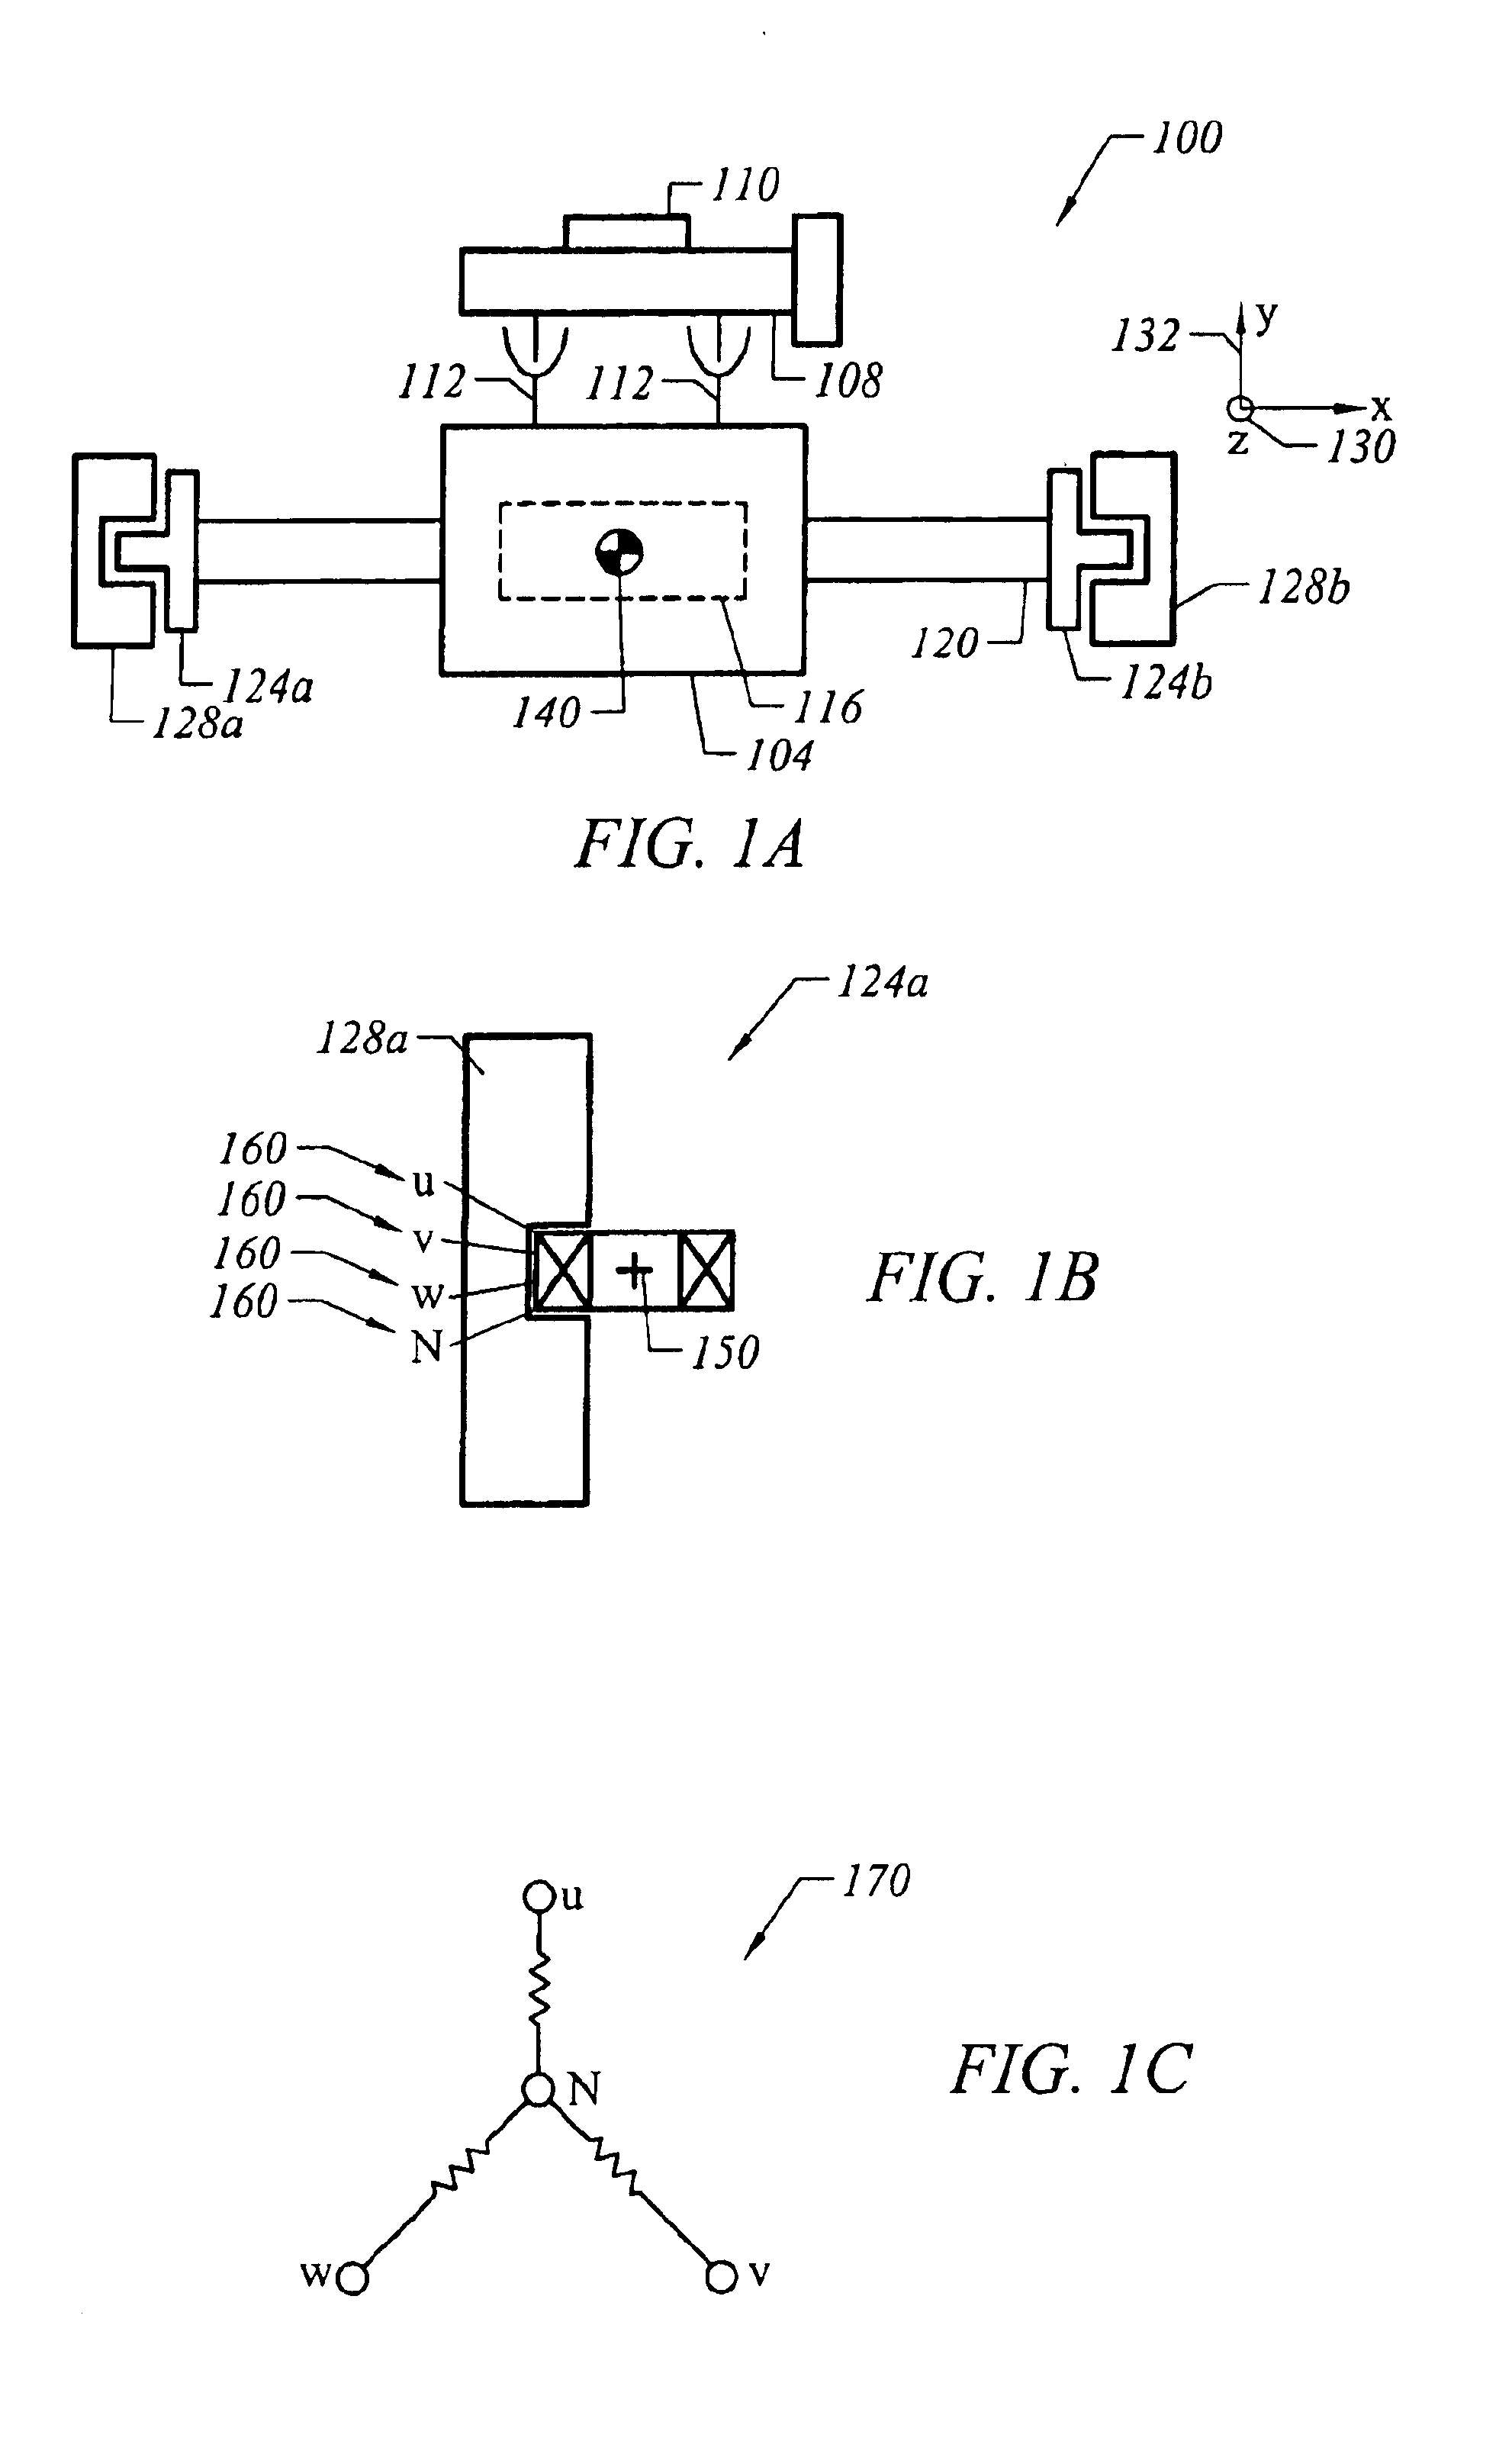 Actuator to correct for off center-of-gravity line of force